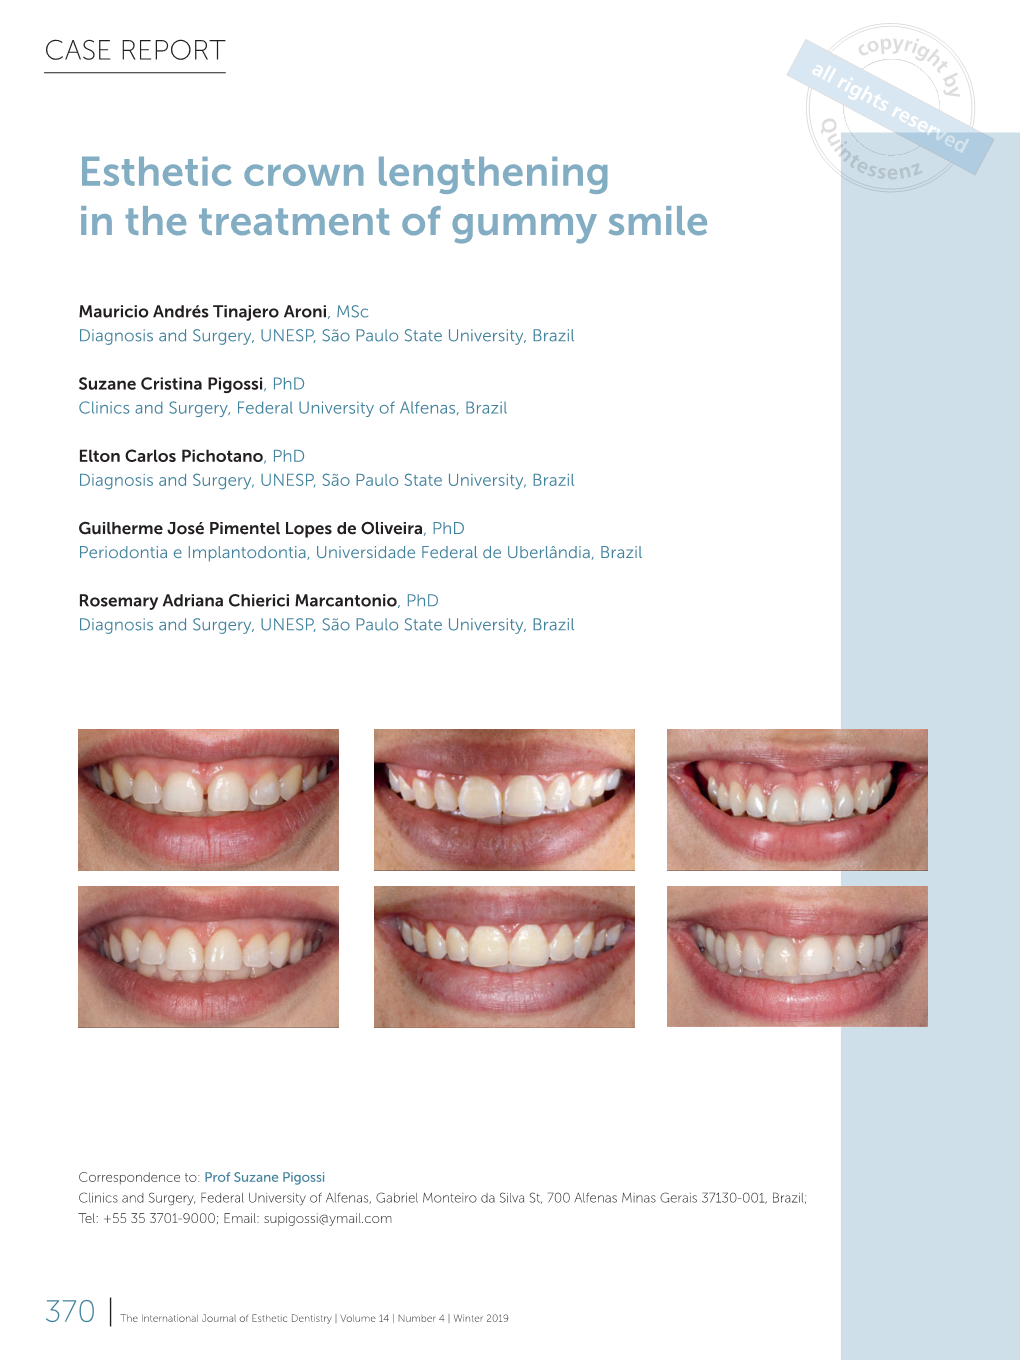 Esthetic Crown Lengthening in the Treatment of Gummy Smile